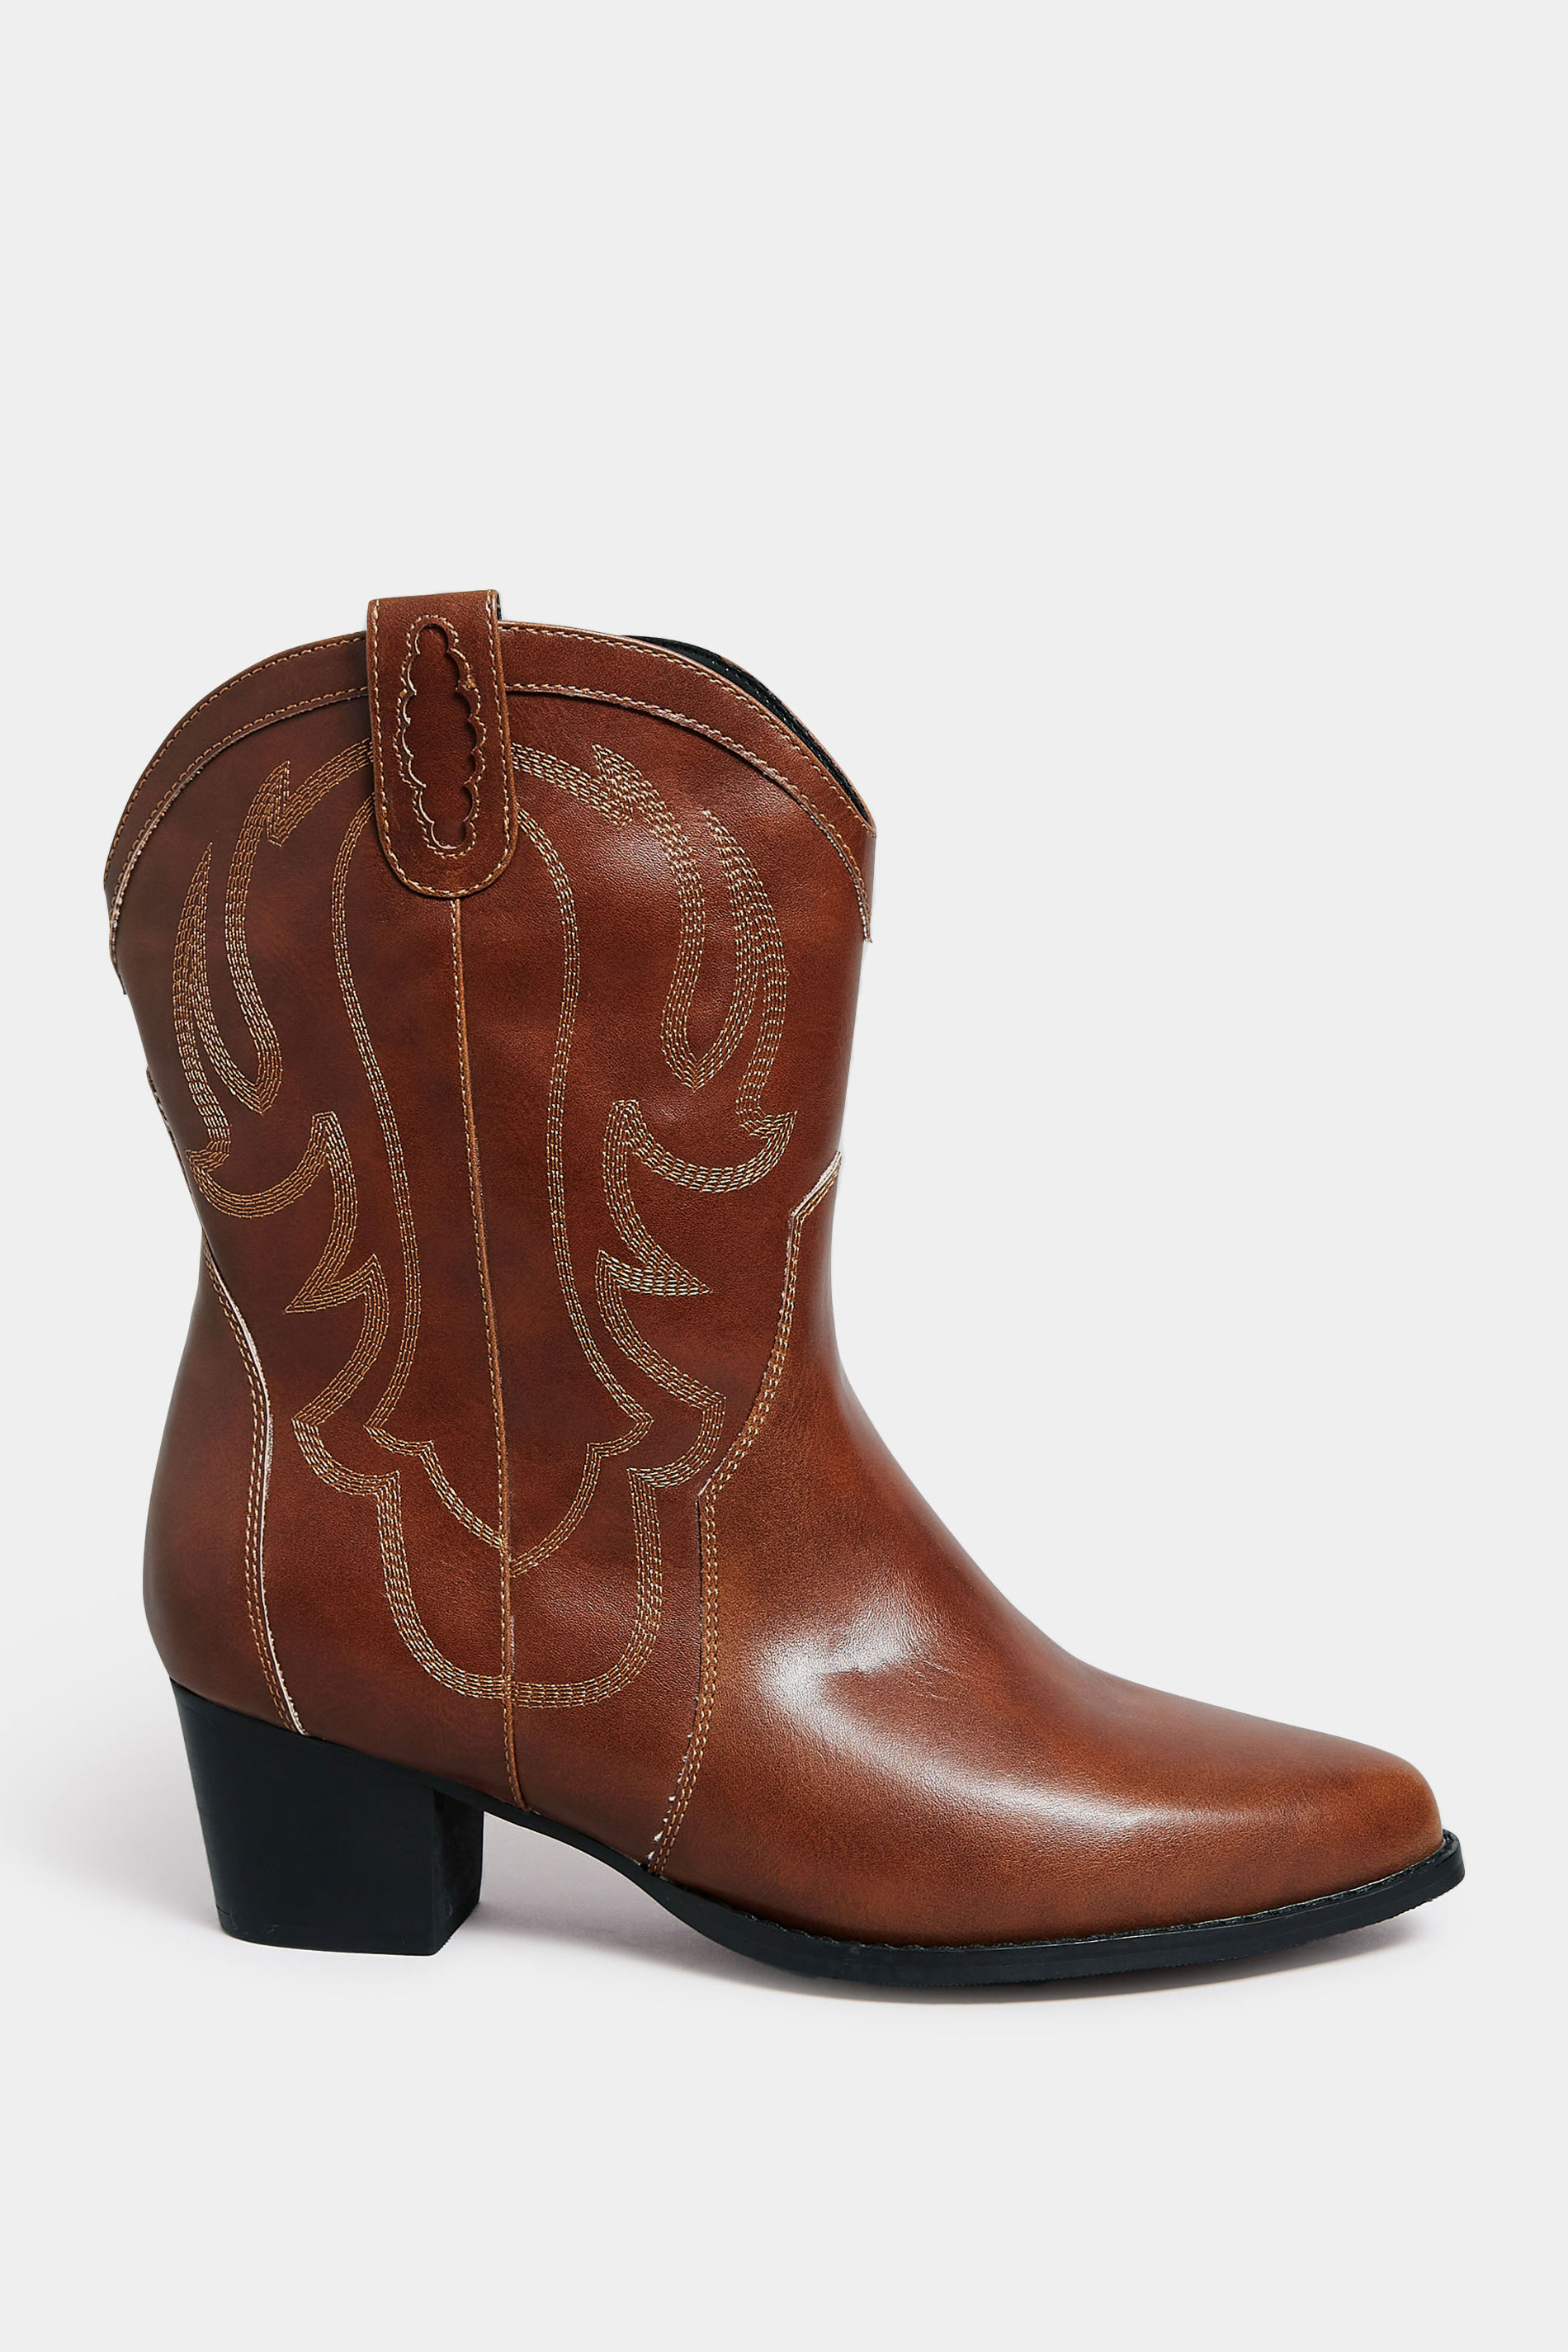 LIMITED COLLECTION Brown Cowboy Ankle Boots in Extra Wide EEE Fit | Yours Clothing 3